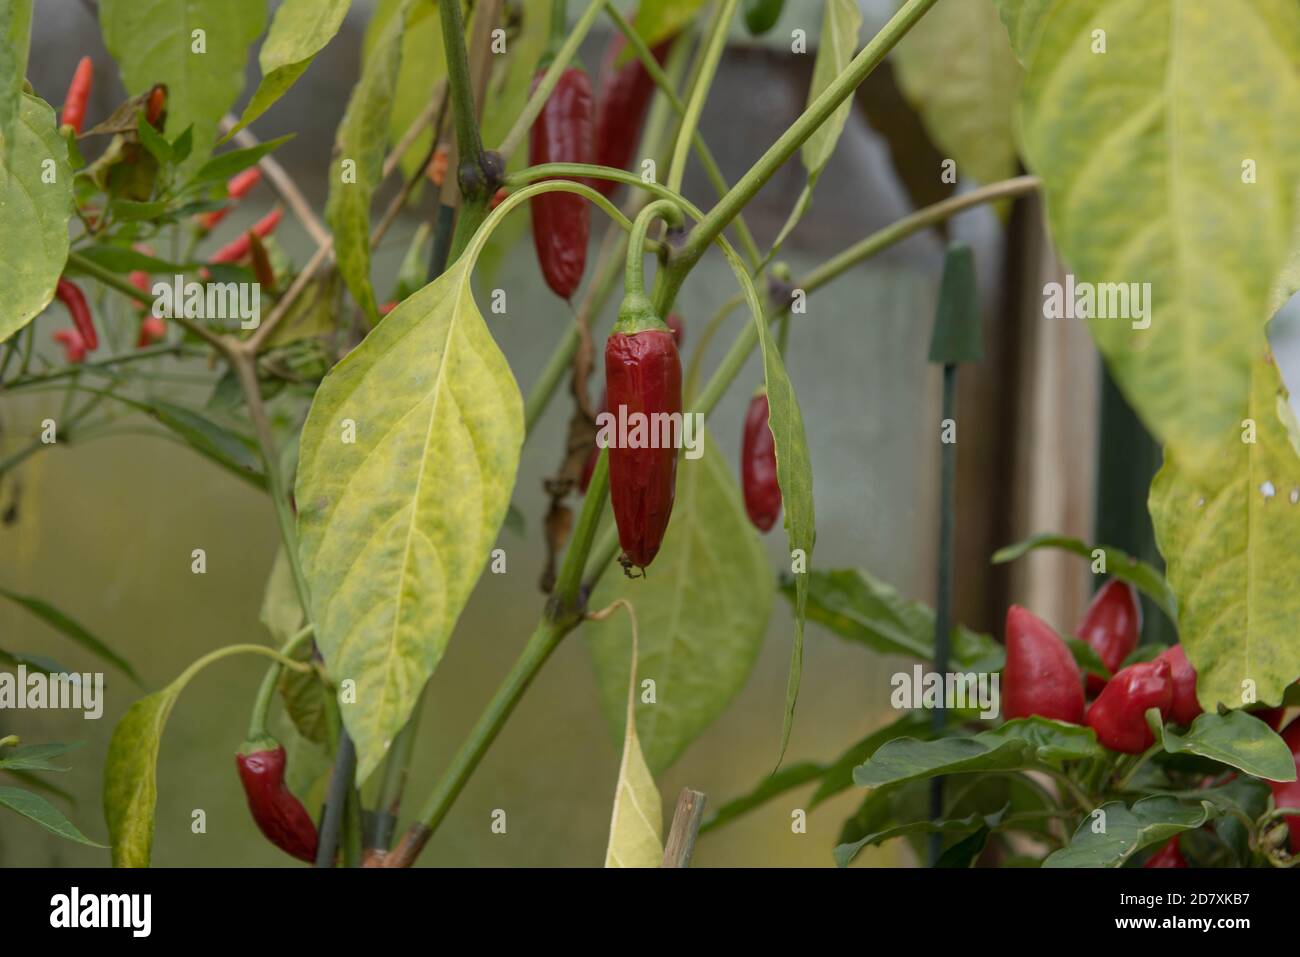 Home Grown Organic Chili or Chilli Peppers 'Rocky' (Capsicum annuum) Growing in a Greenhouse on an Allotment in a Vegetable Garden in Rural Devon, Eng Stock Photo